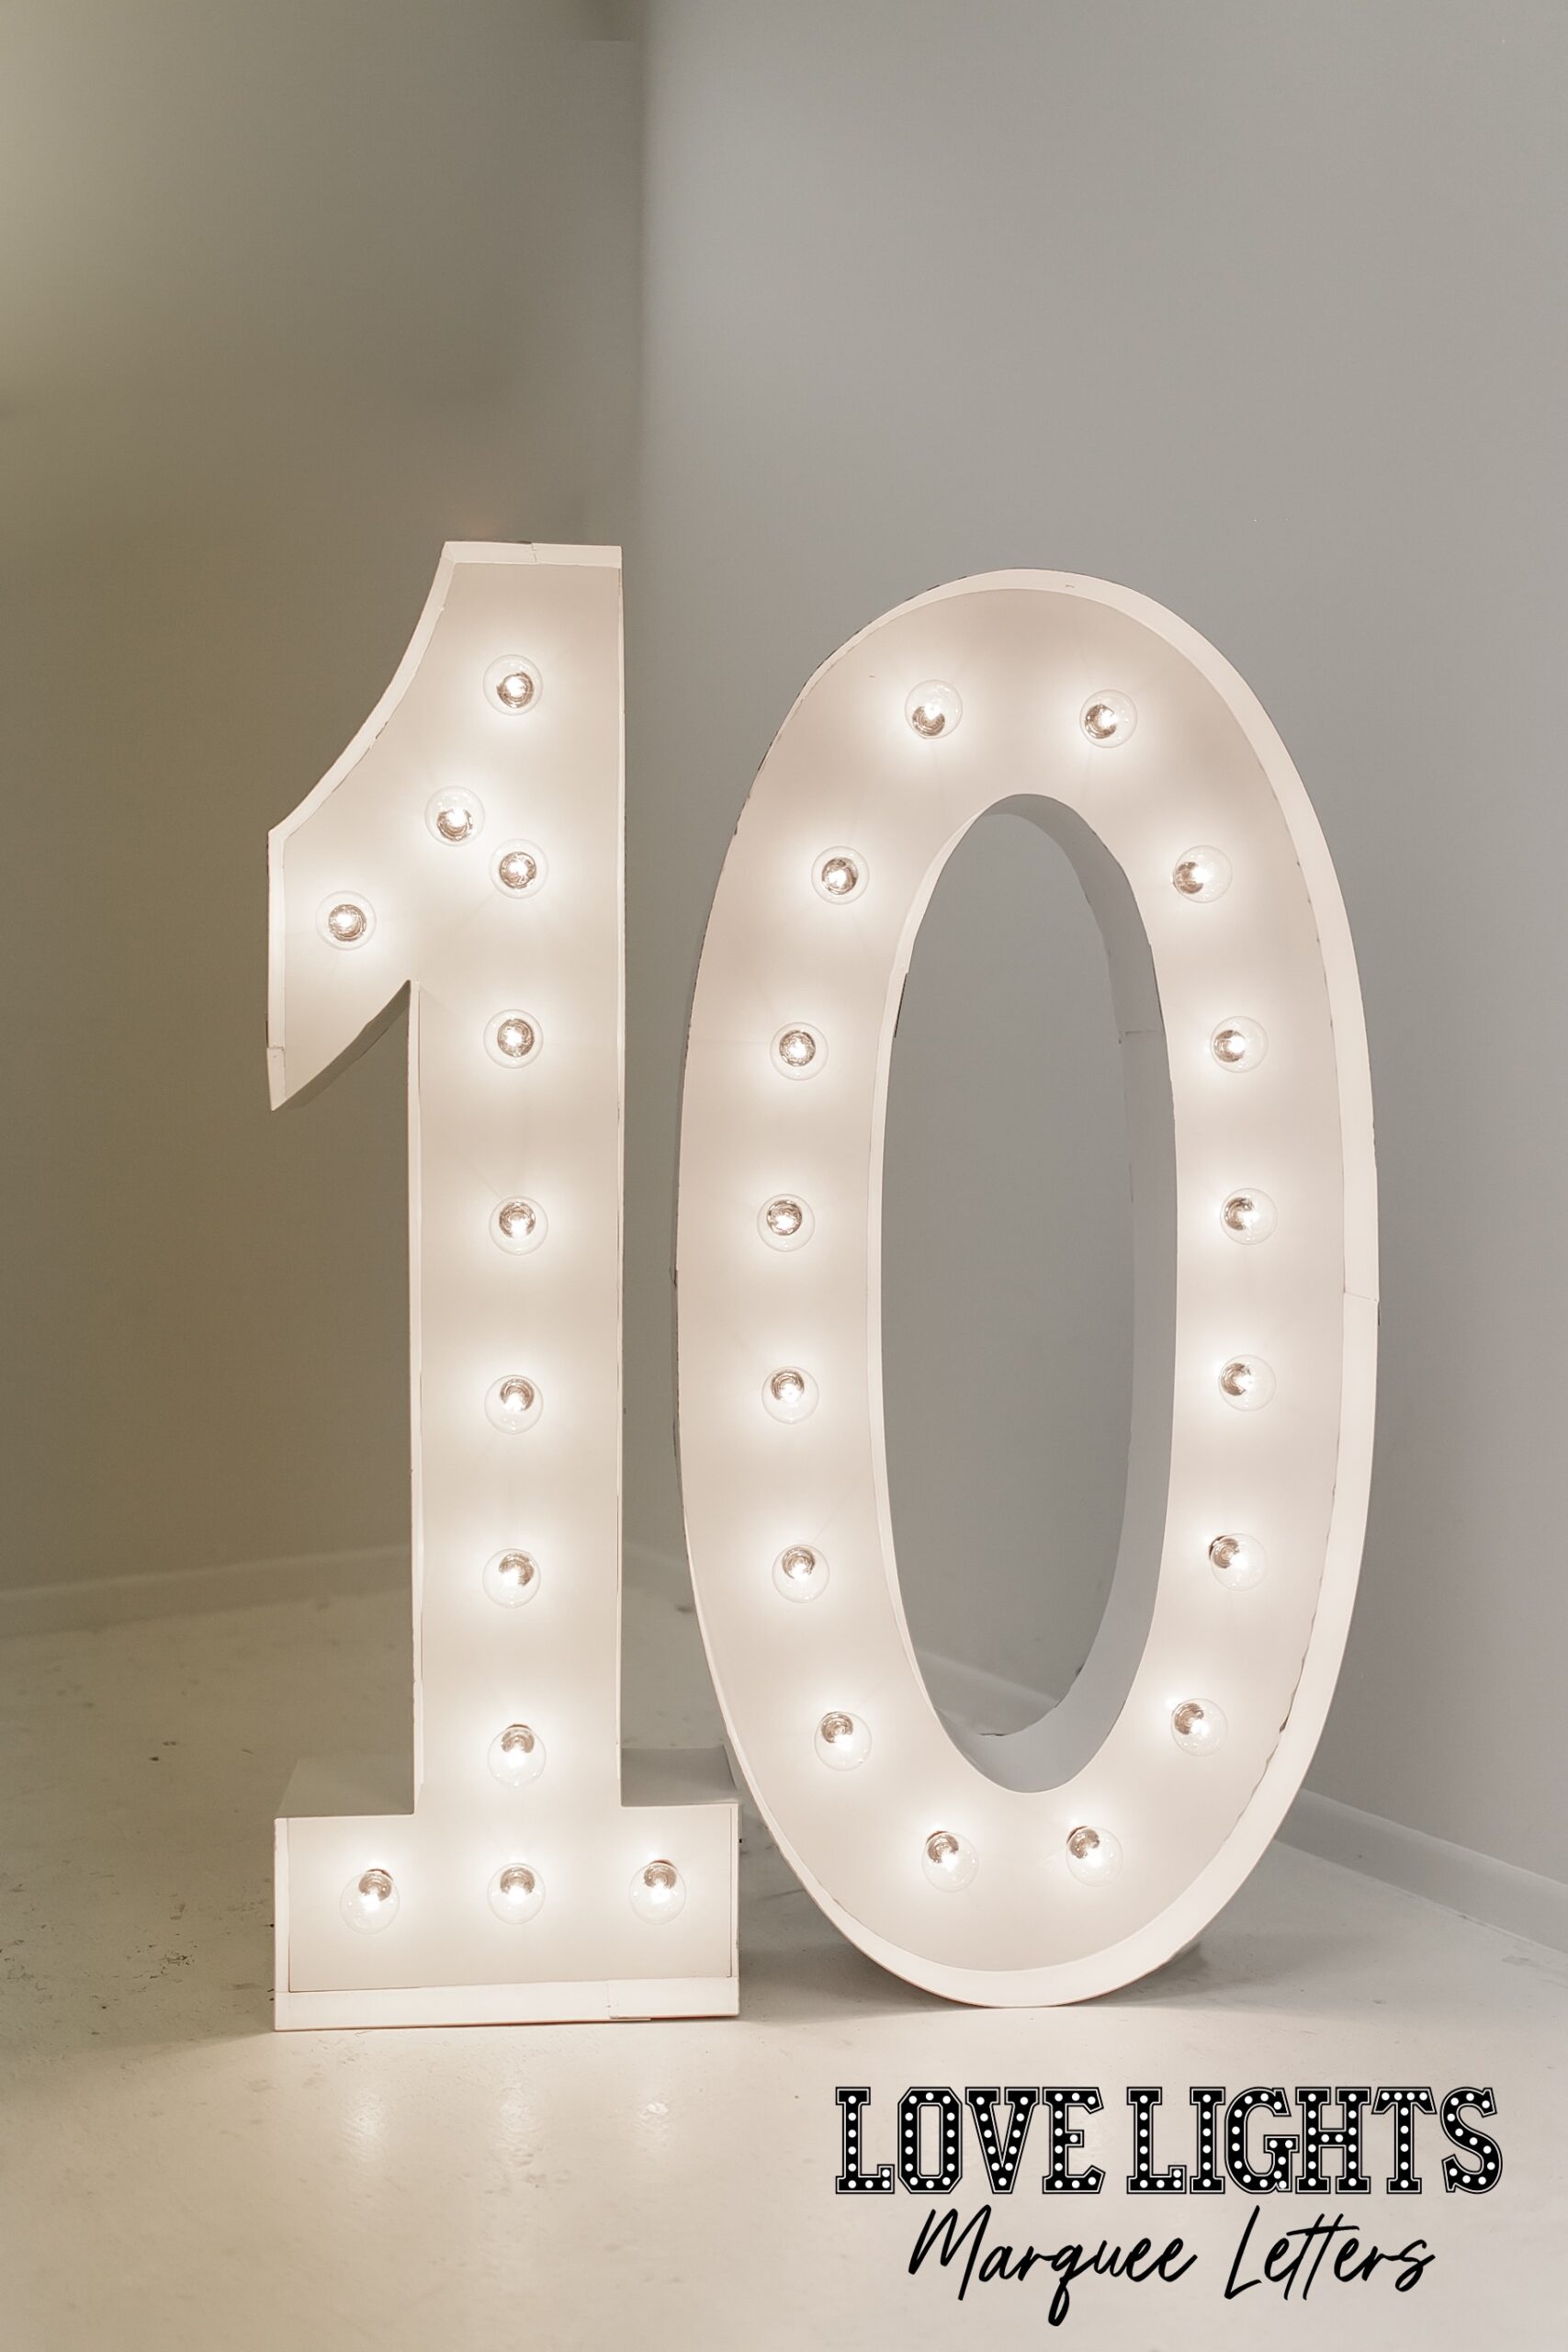 10 in lit marquee letters in a room with balloons